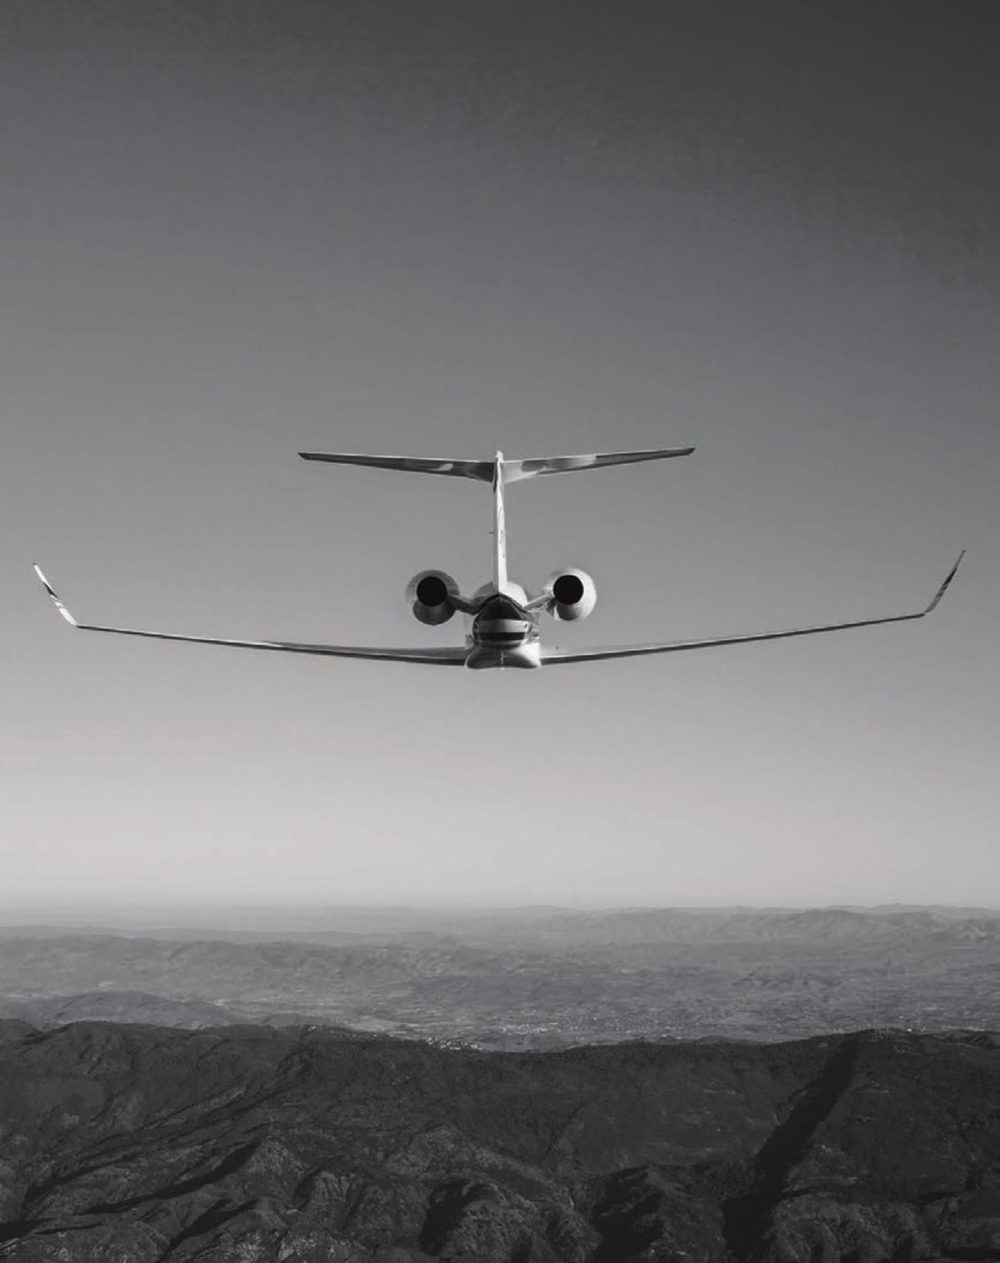 The Gulfstream G650ER sets the standard for performance in business aviation